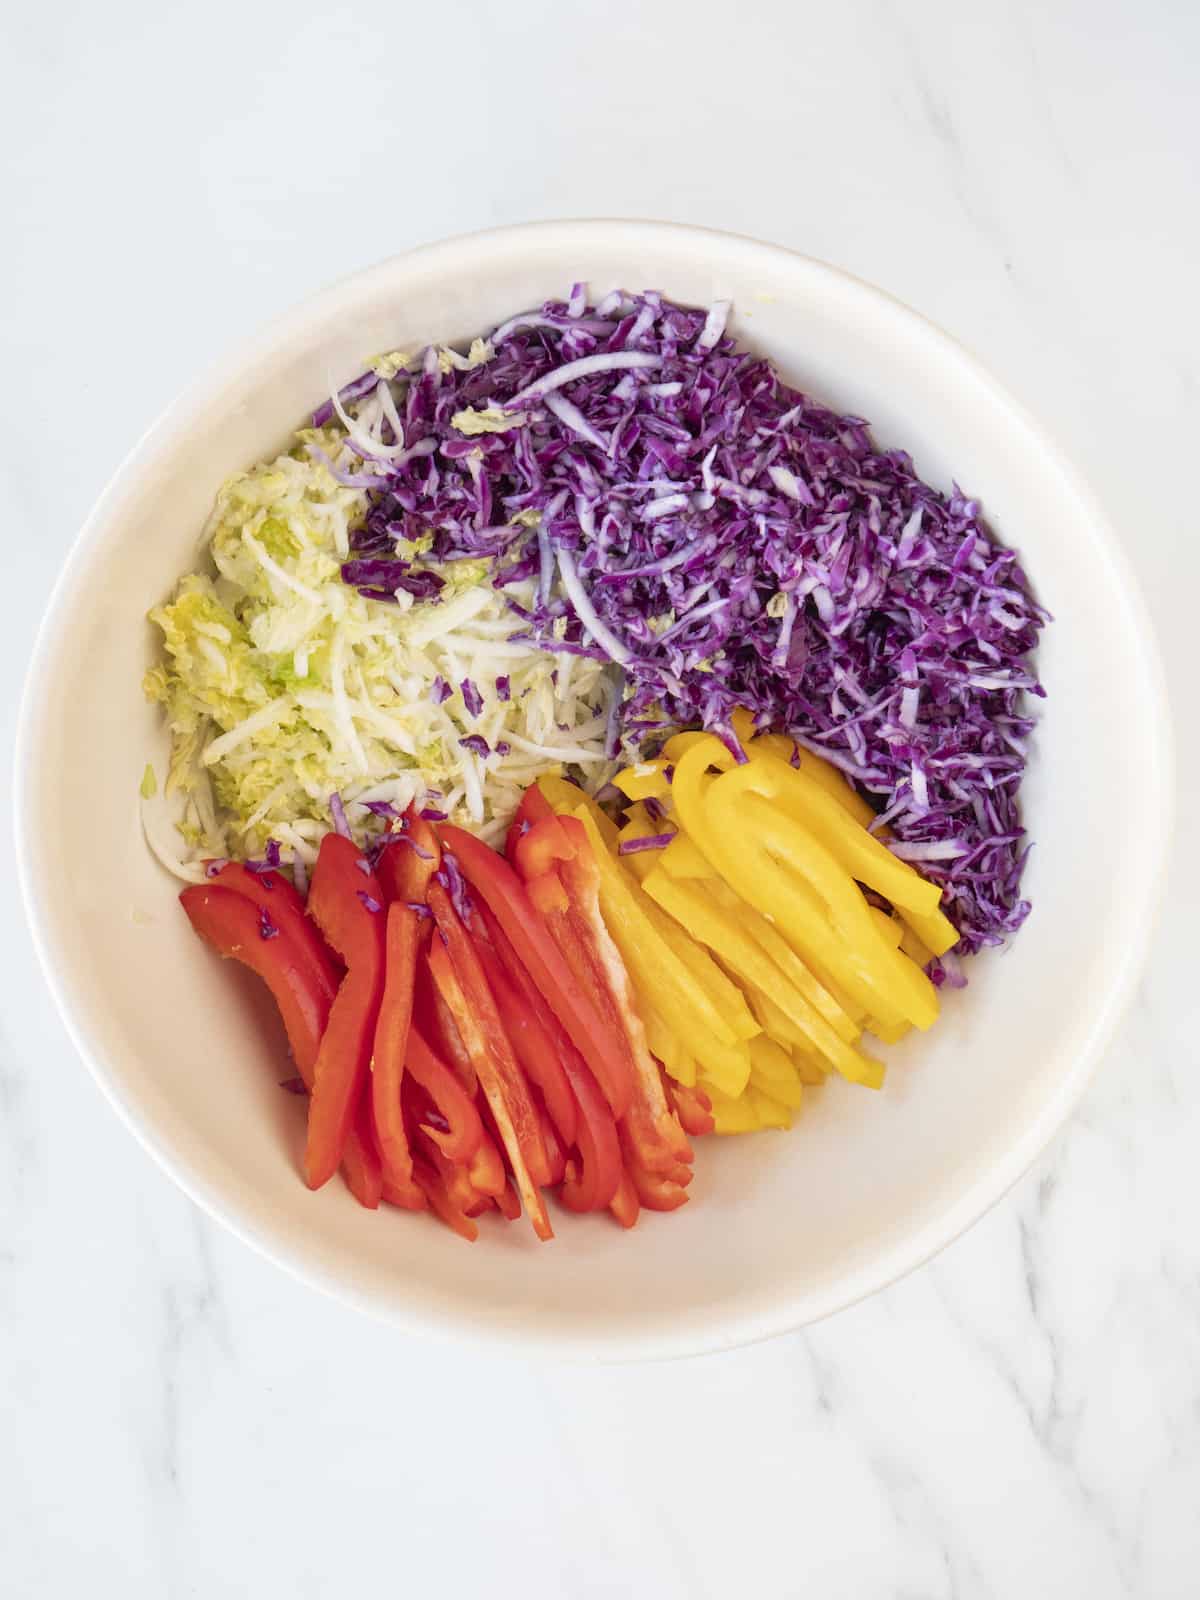 A white bowl with shredded napa and purple cabbages, and red and yellow peppers cut into matchsticks.